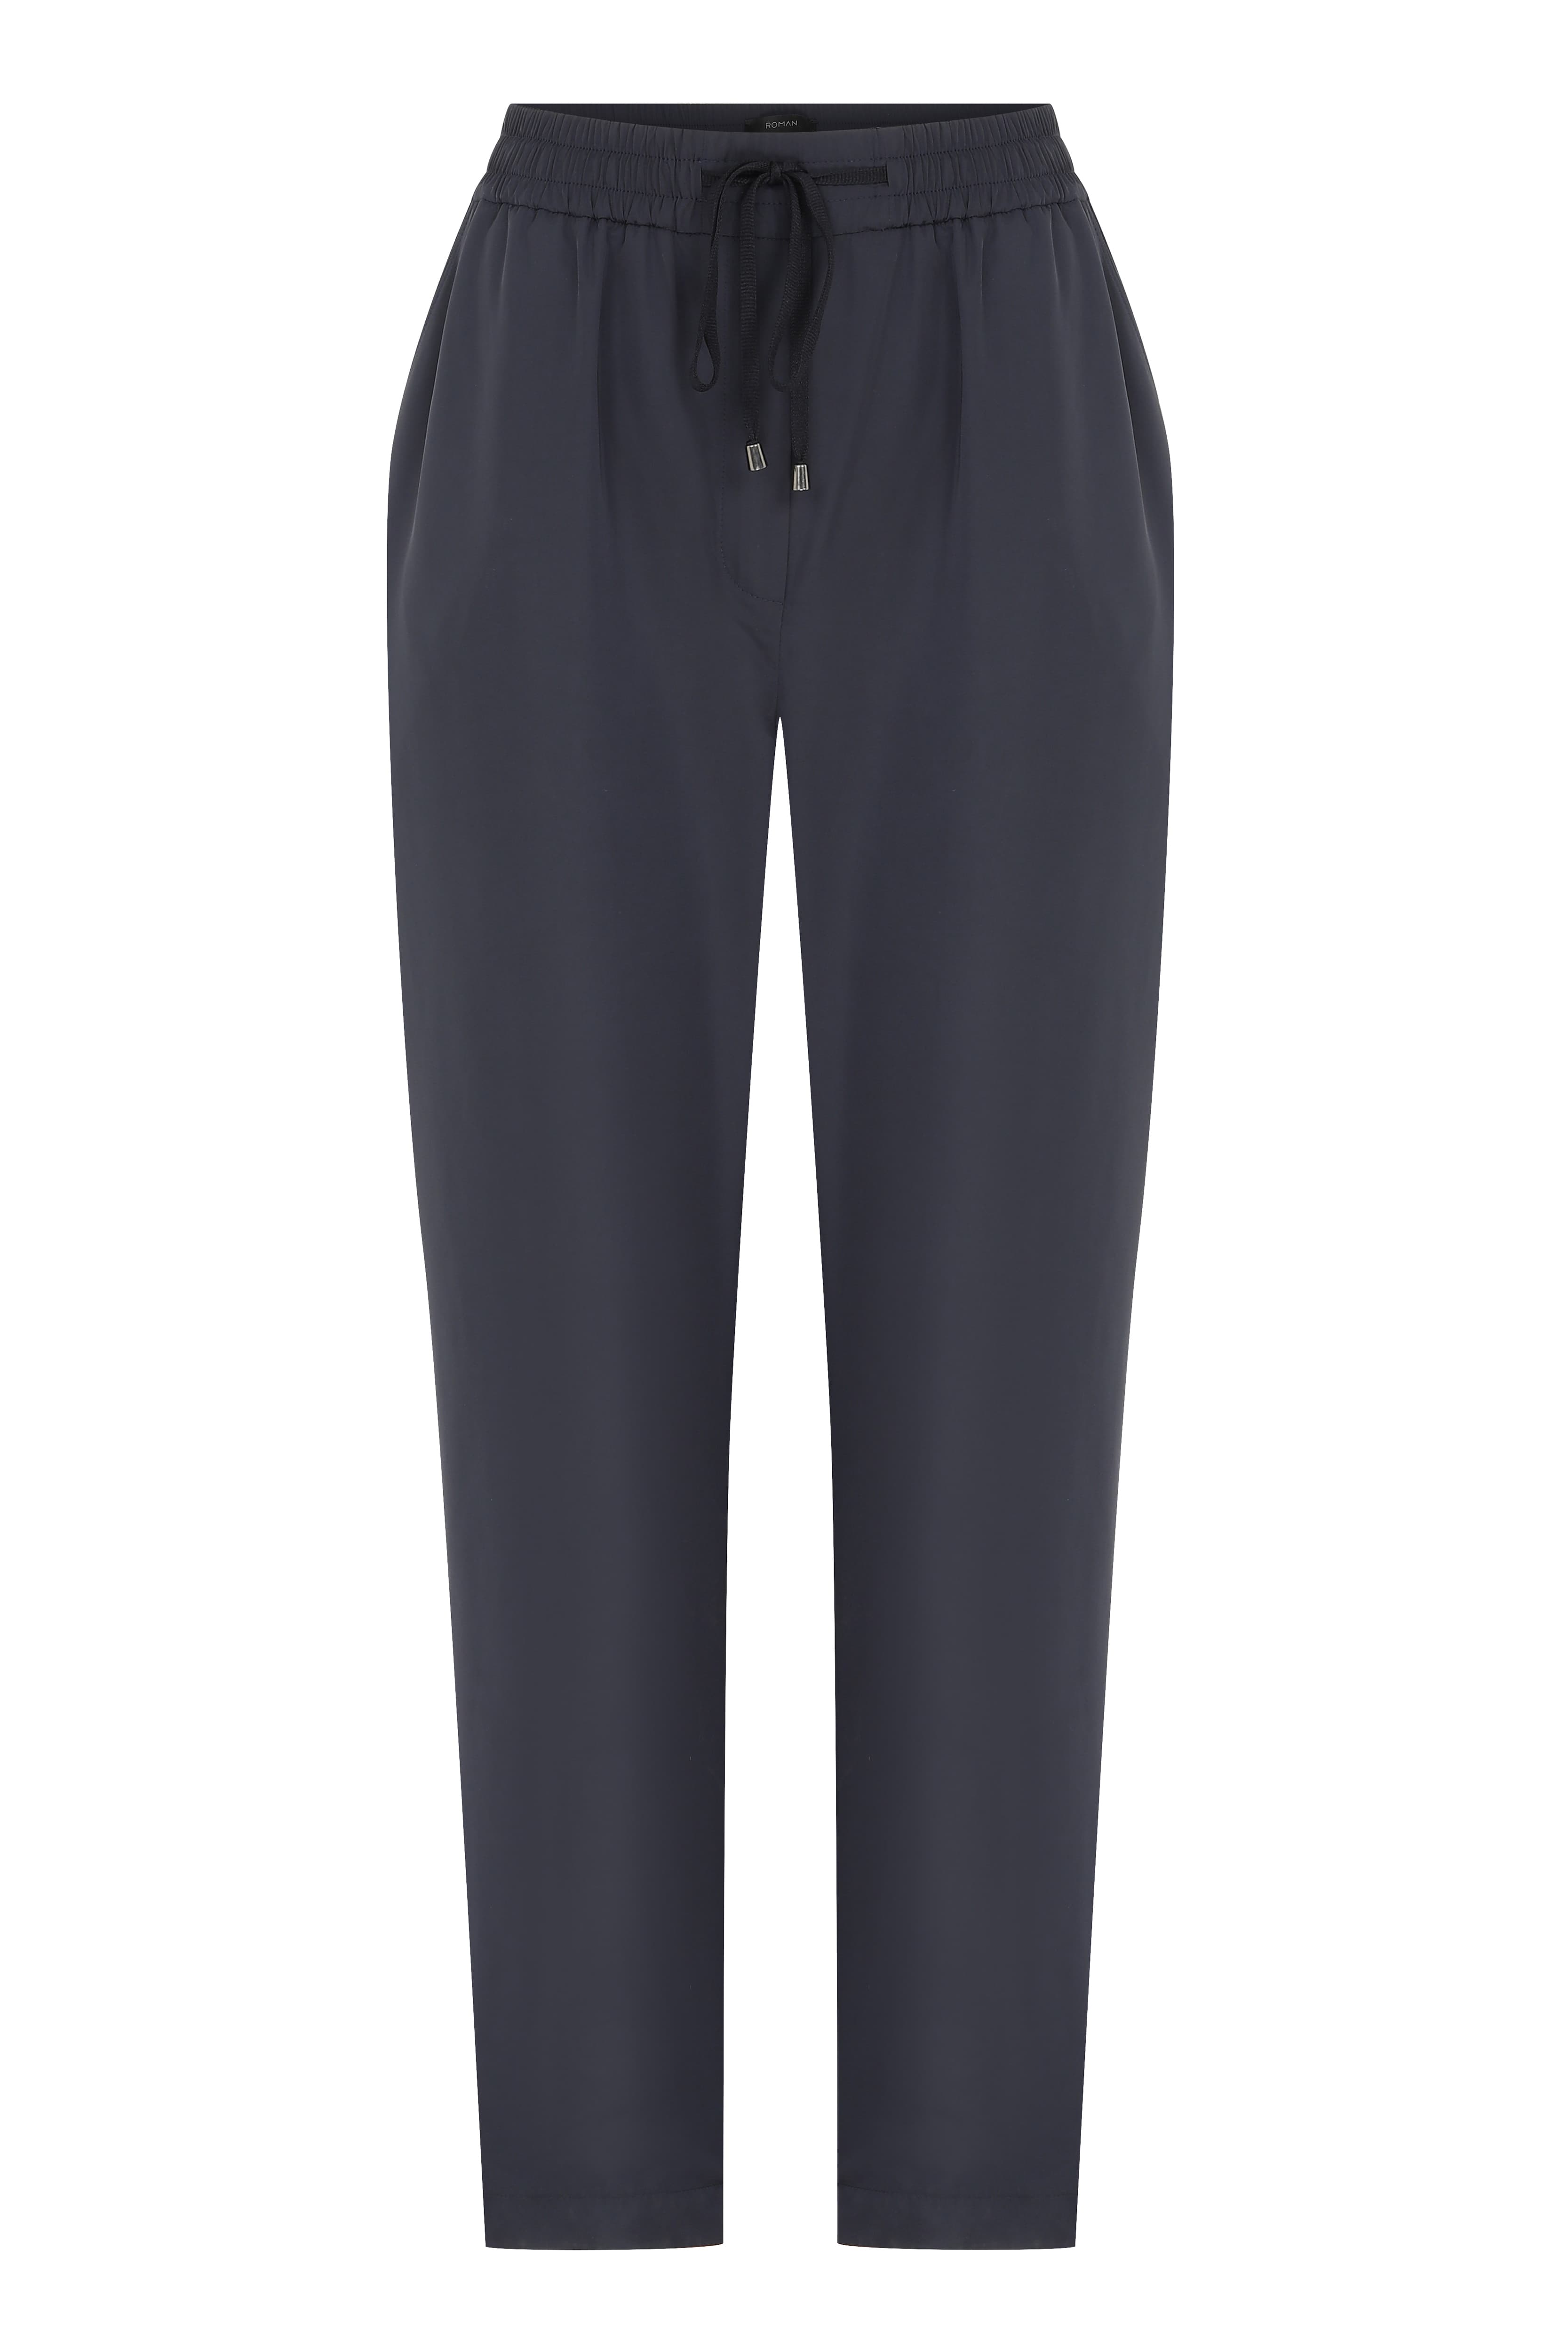 Everyday Navy Blue Women's Trousers --[NAVY]